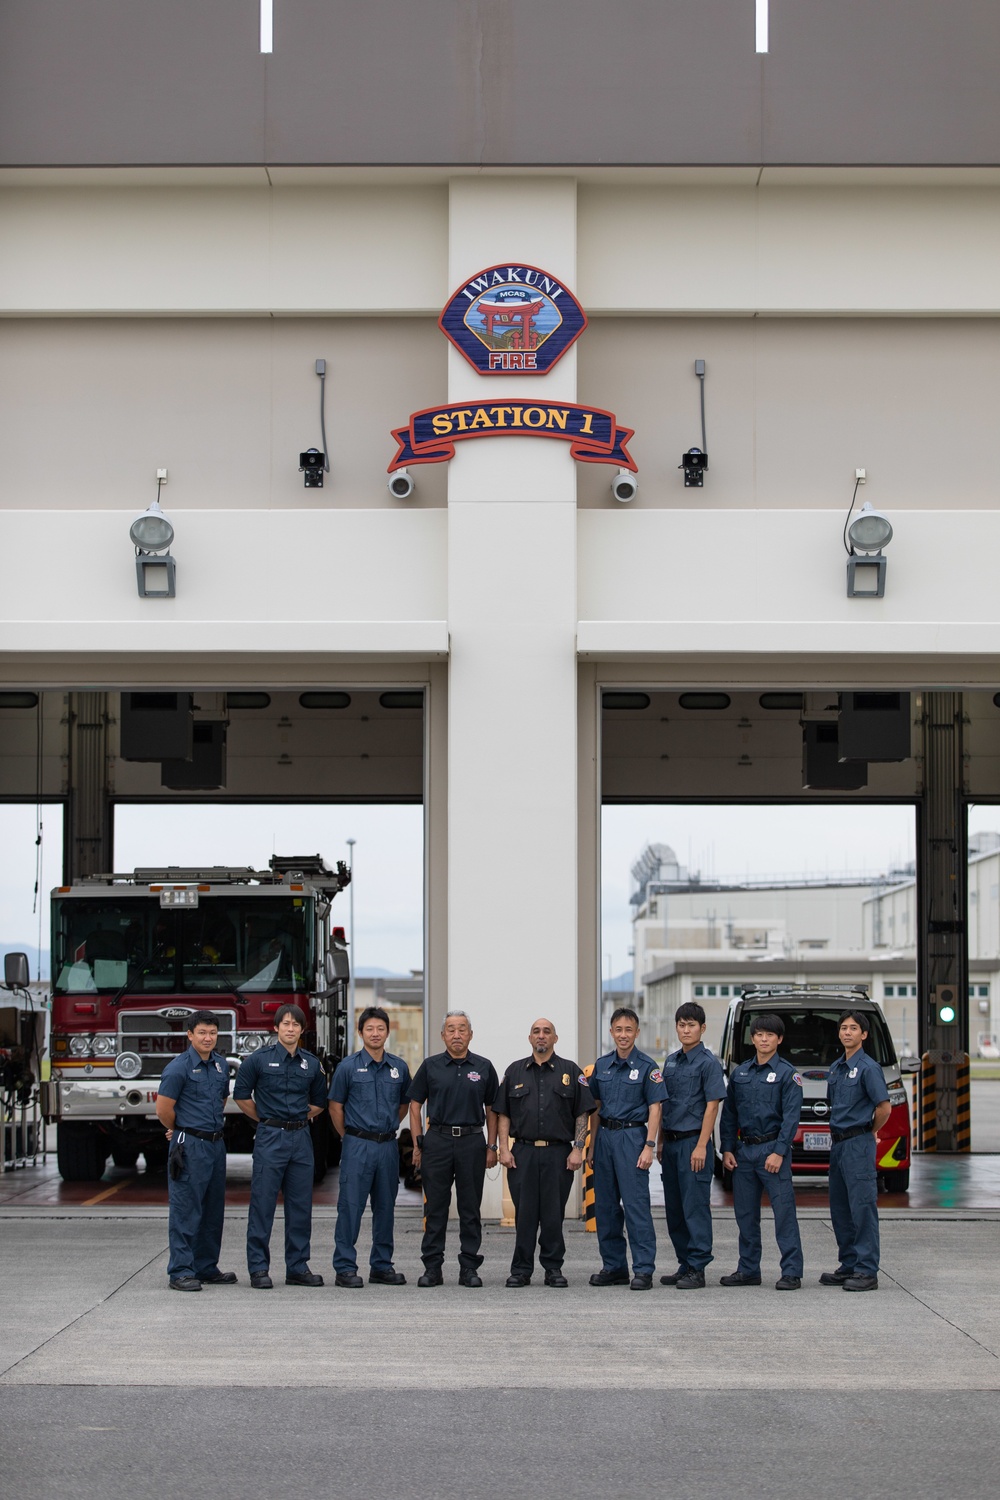 More than a job: Marine Corps Air Station Iwakuni Fire Department dedicates to serving community